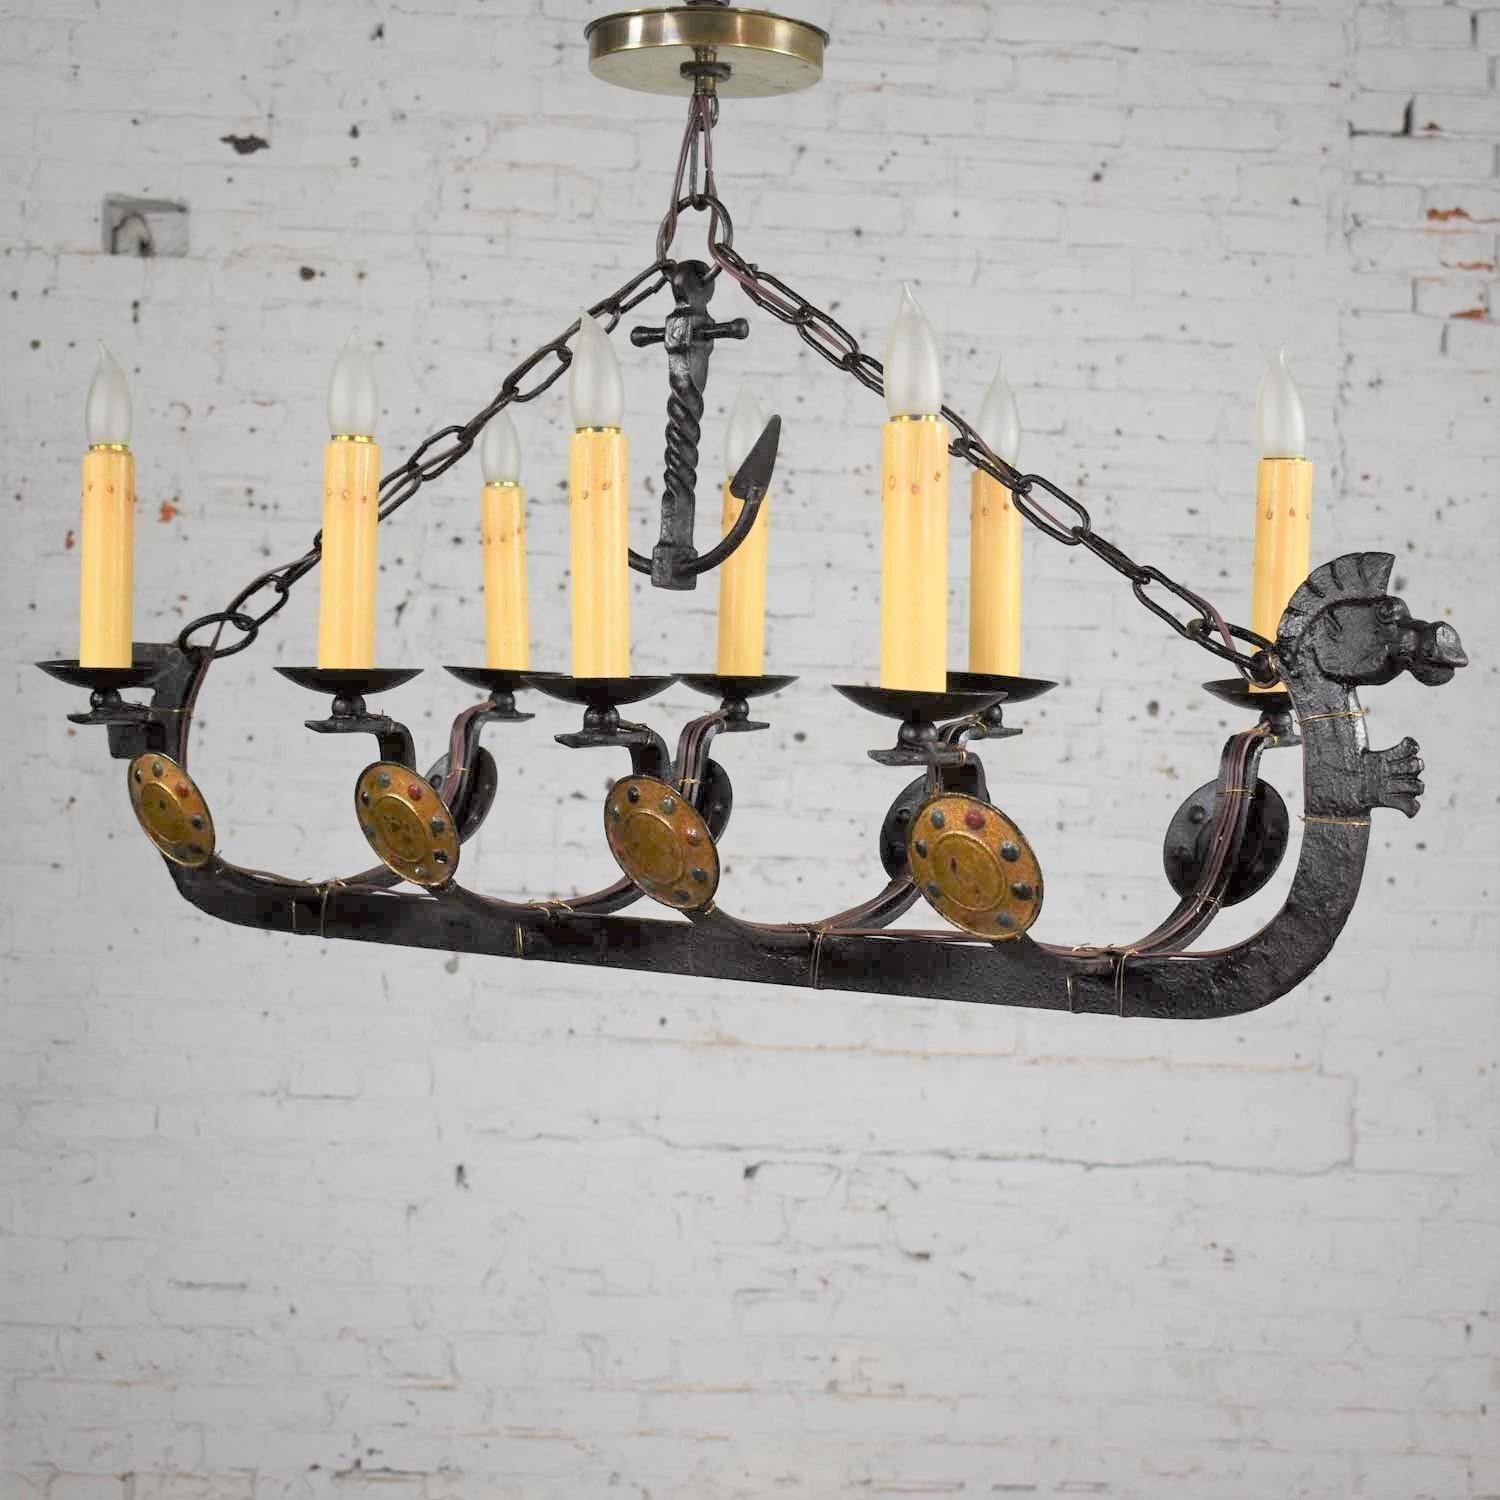 Handsome and unusual cast iron eight light chandelier in the shape of a Viking longboat or ship with a horse head, horse tail, warrior shields, chain and anchor details. It is in wonderful antique condition. The cast iron has a natural patina that